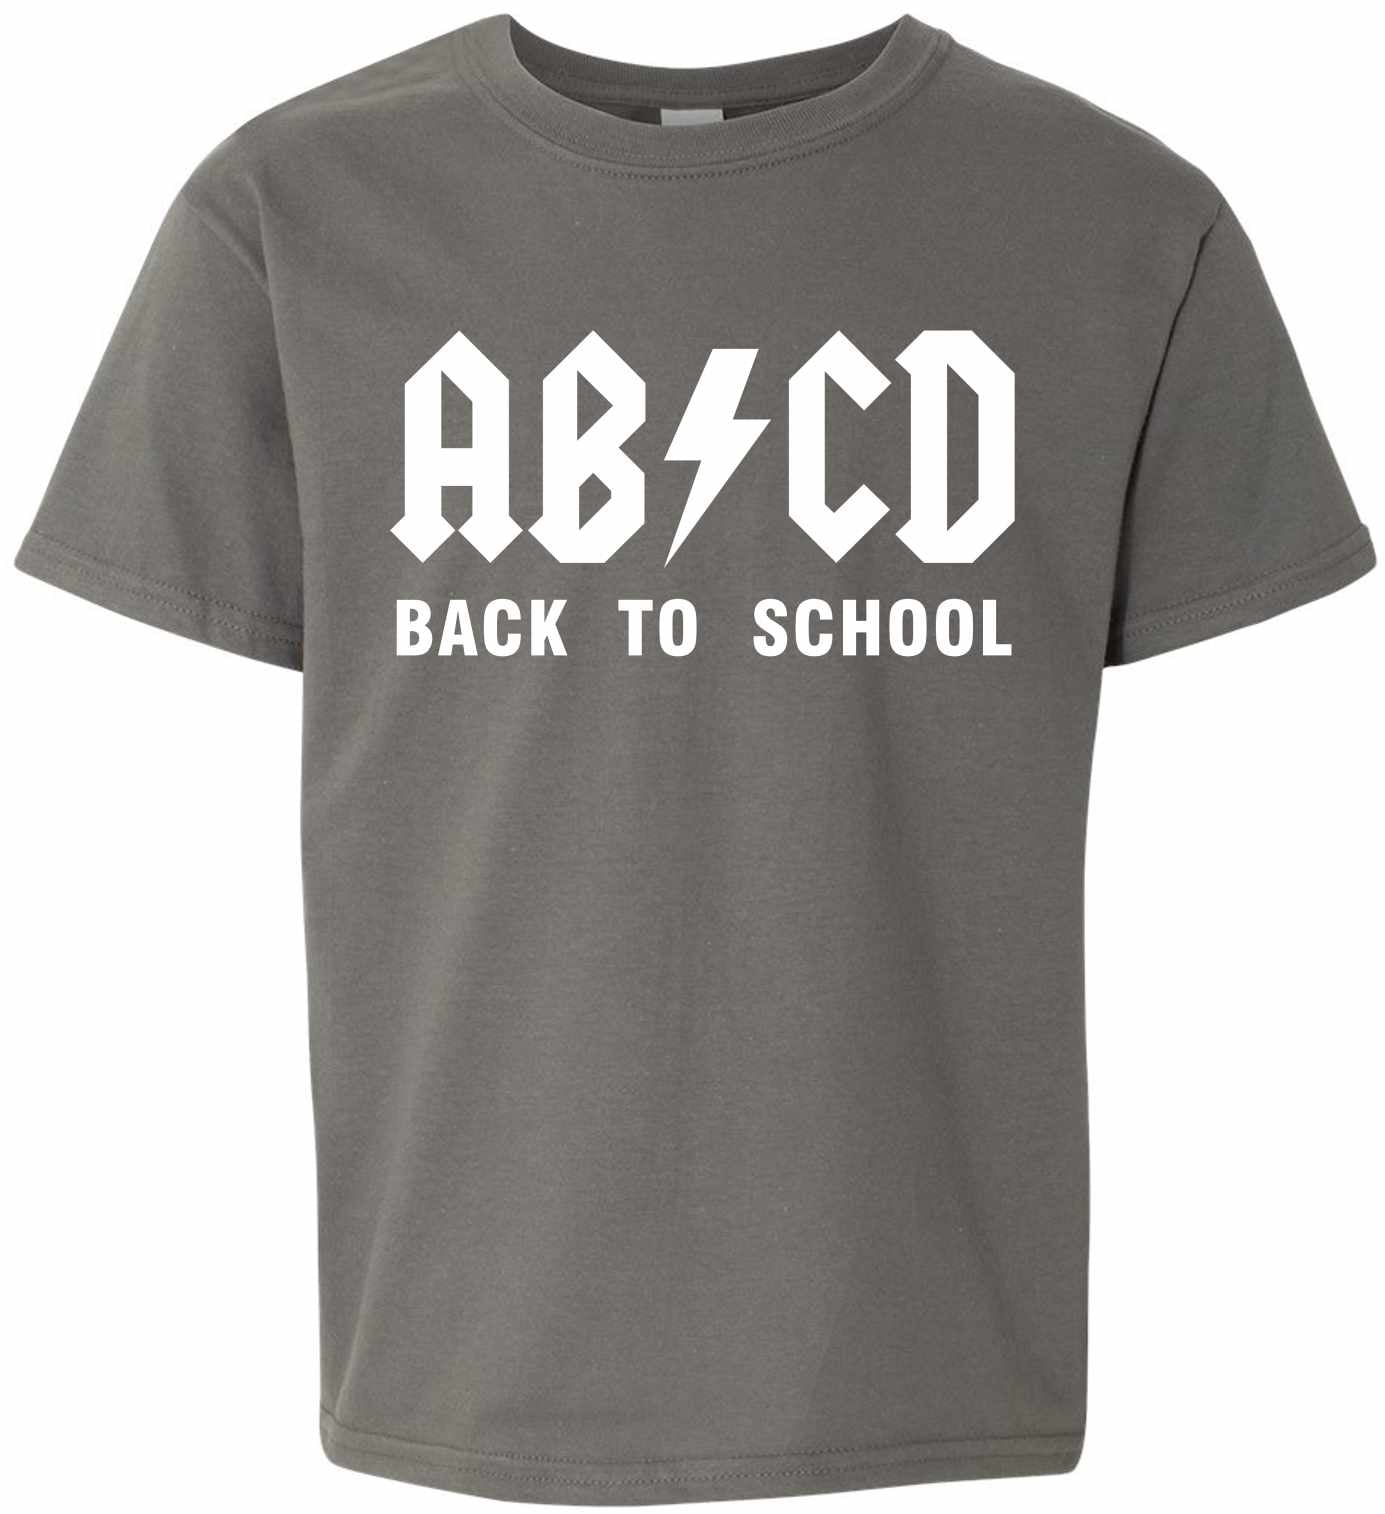 ABCD Back To School on Kids T-Shirt